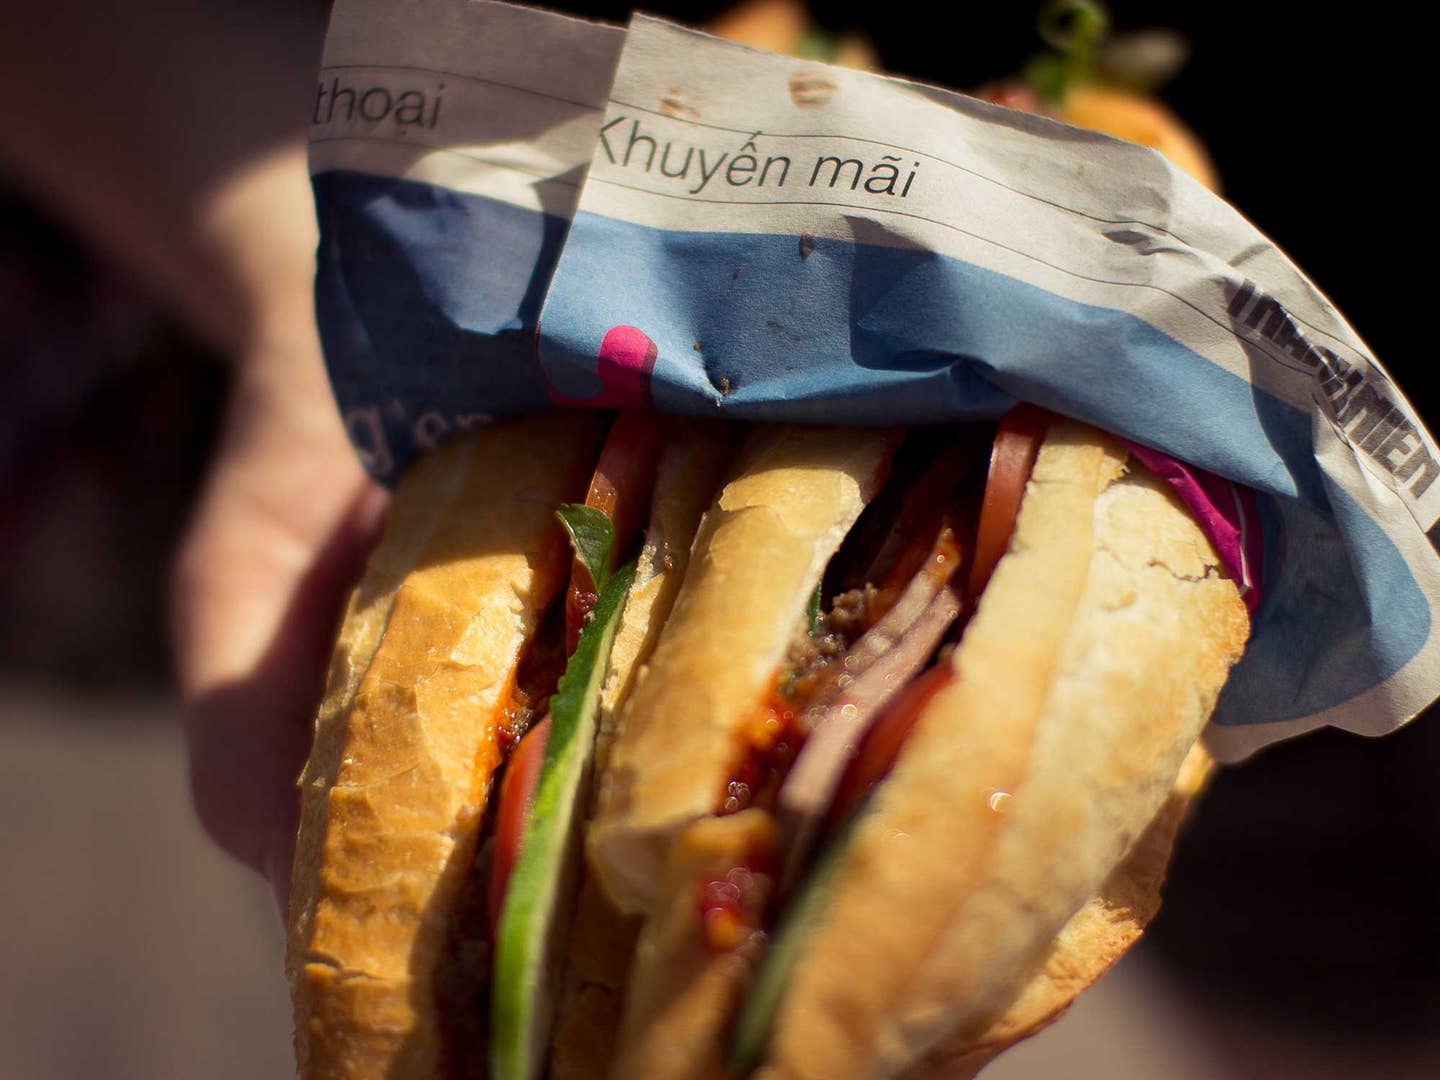 And America’s Hottest Sandwich Is…